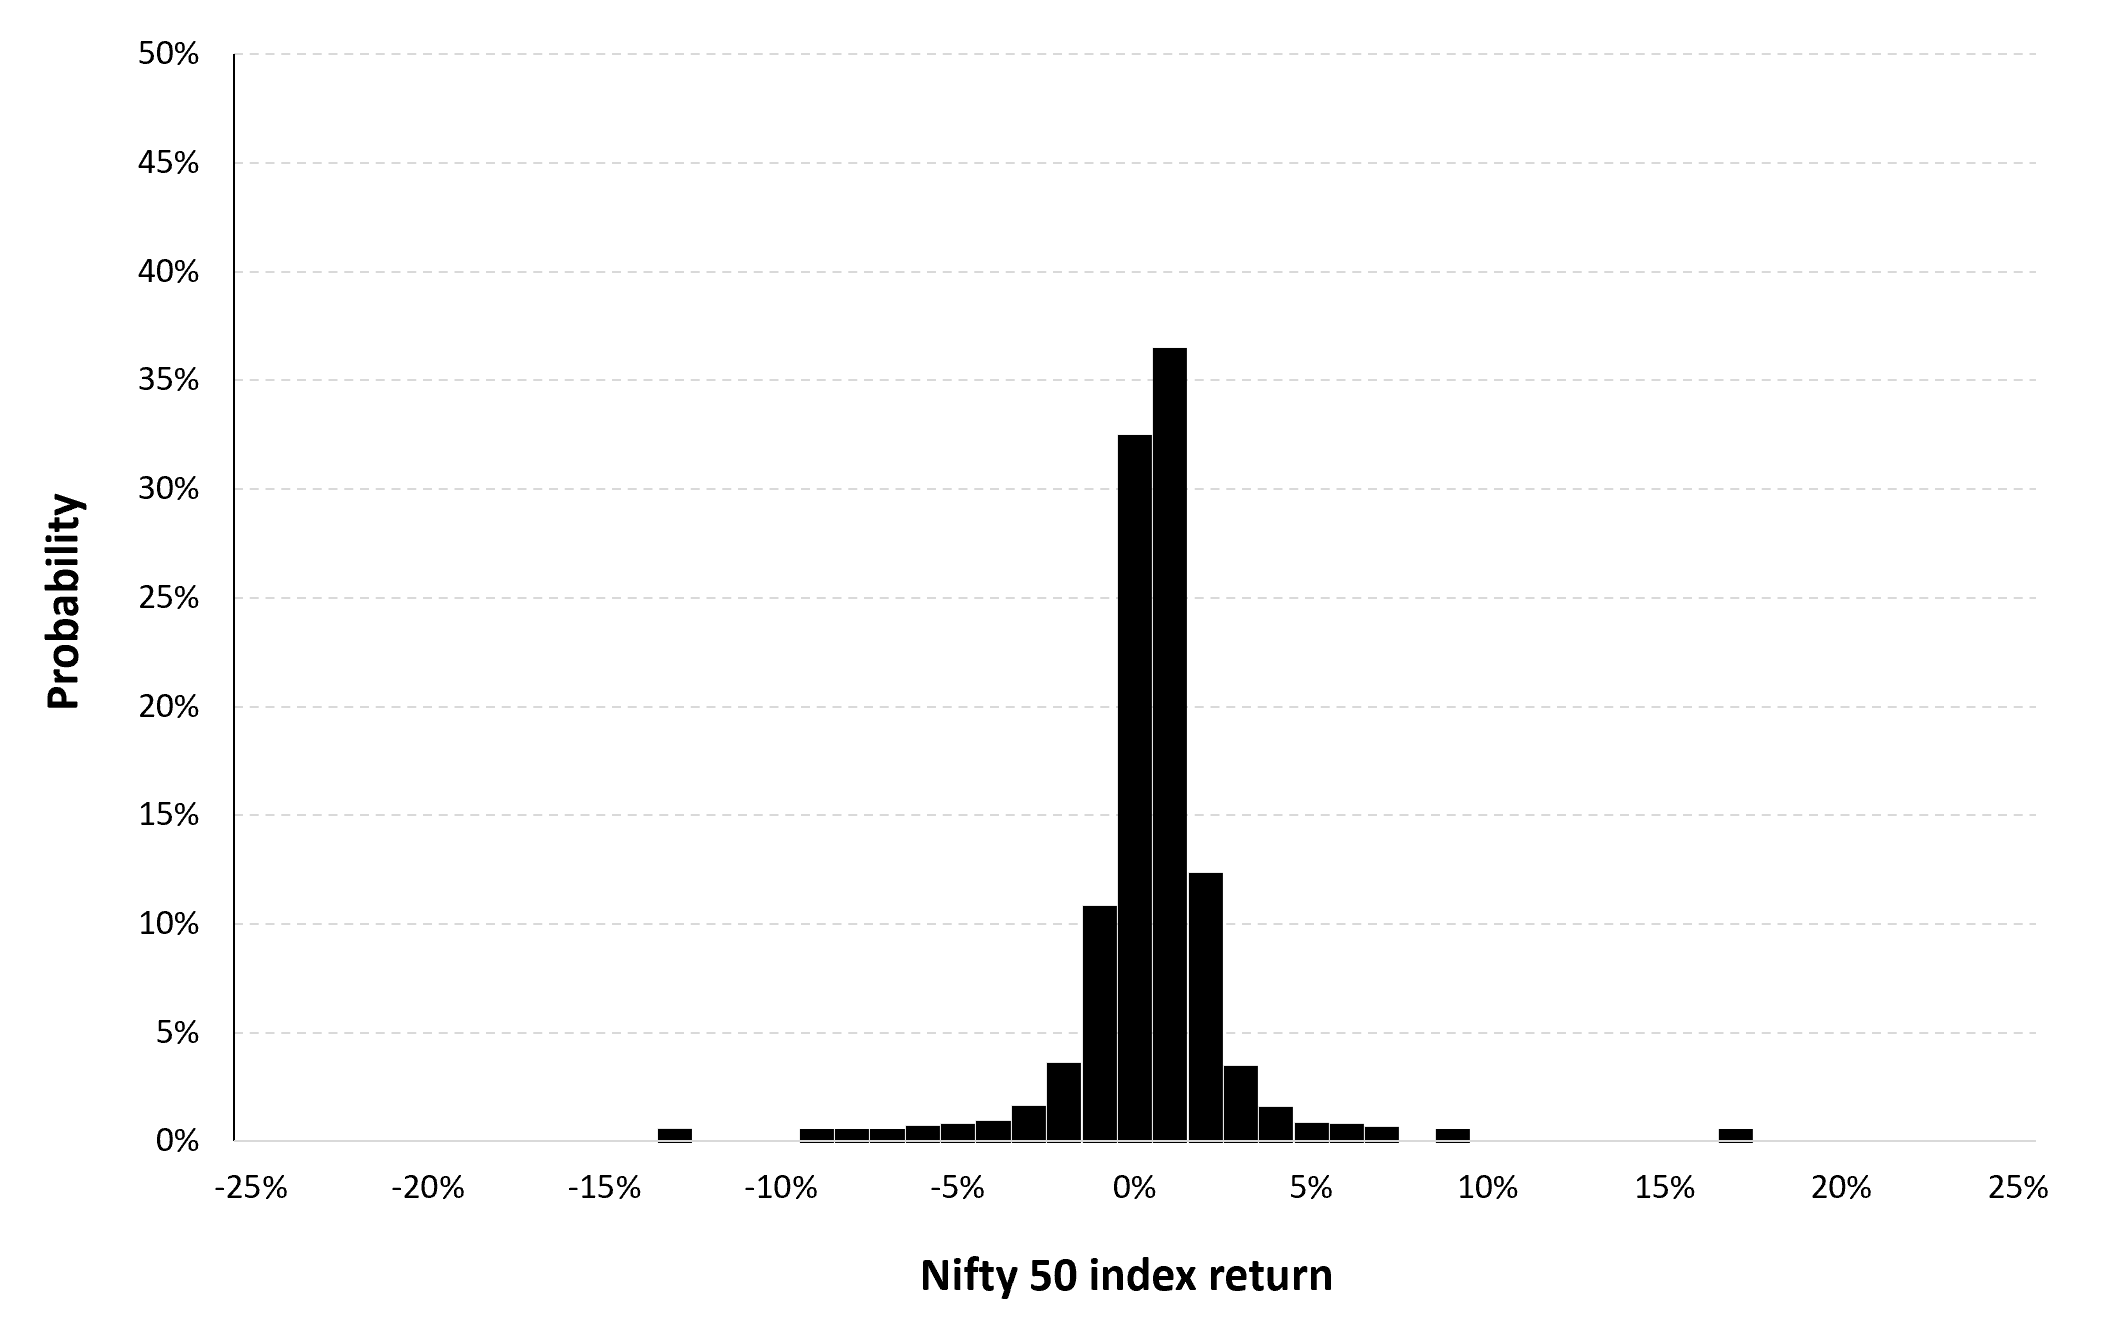 Historical distribution of the daily Nifty 50 index returns